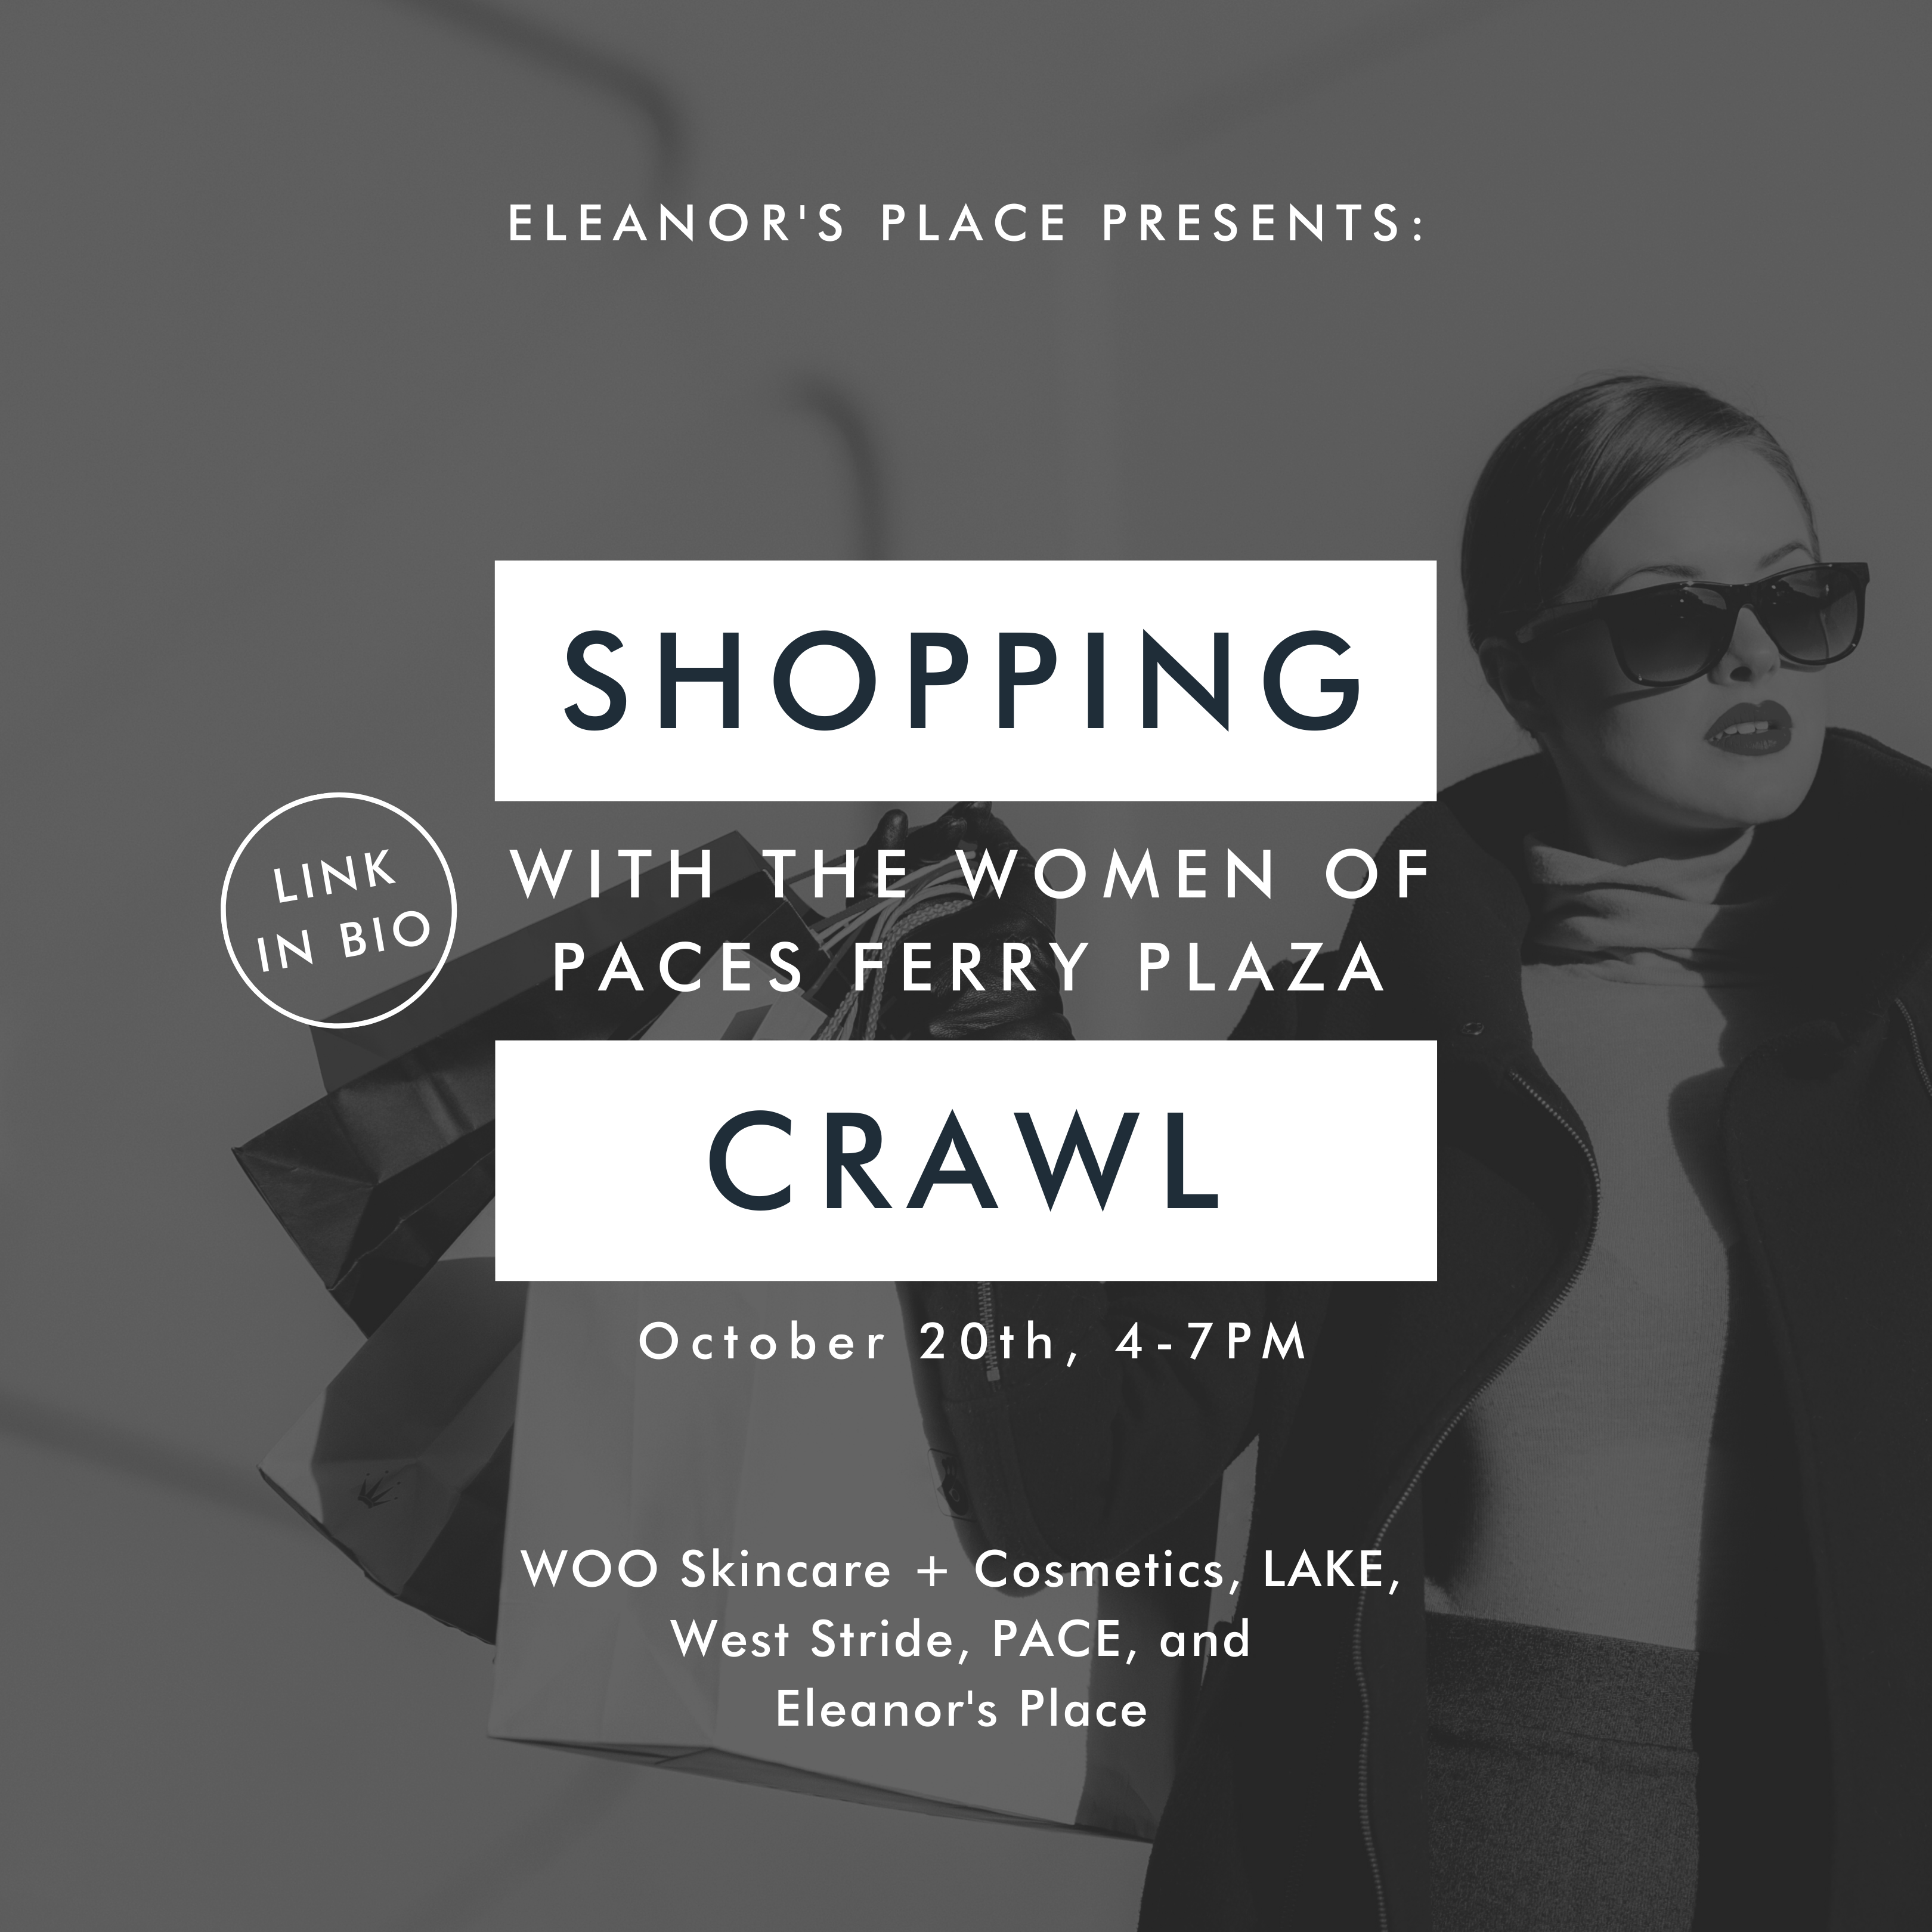 Shopping Crawl with the Women of Paces Ferry Plaza